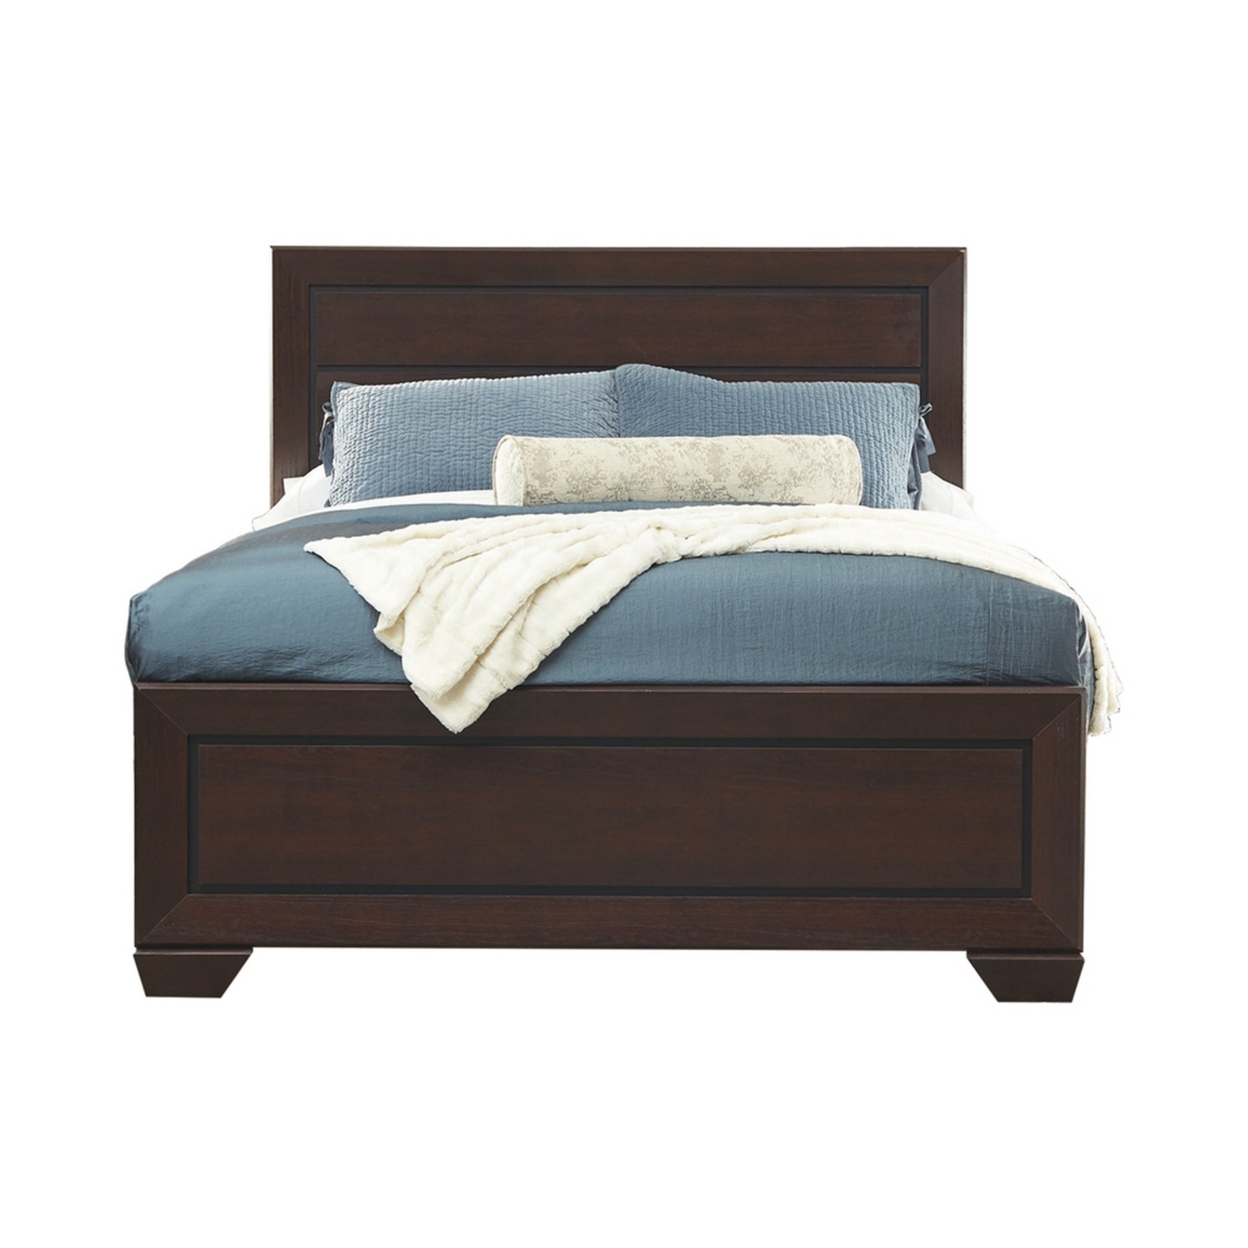 Panel Design Eastern King Bed With Contrasting Recessed Grooves, Dark Brown- Saltoro Sherpi